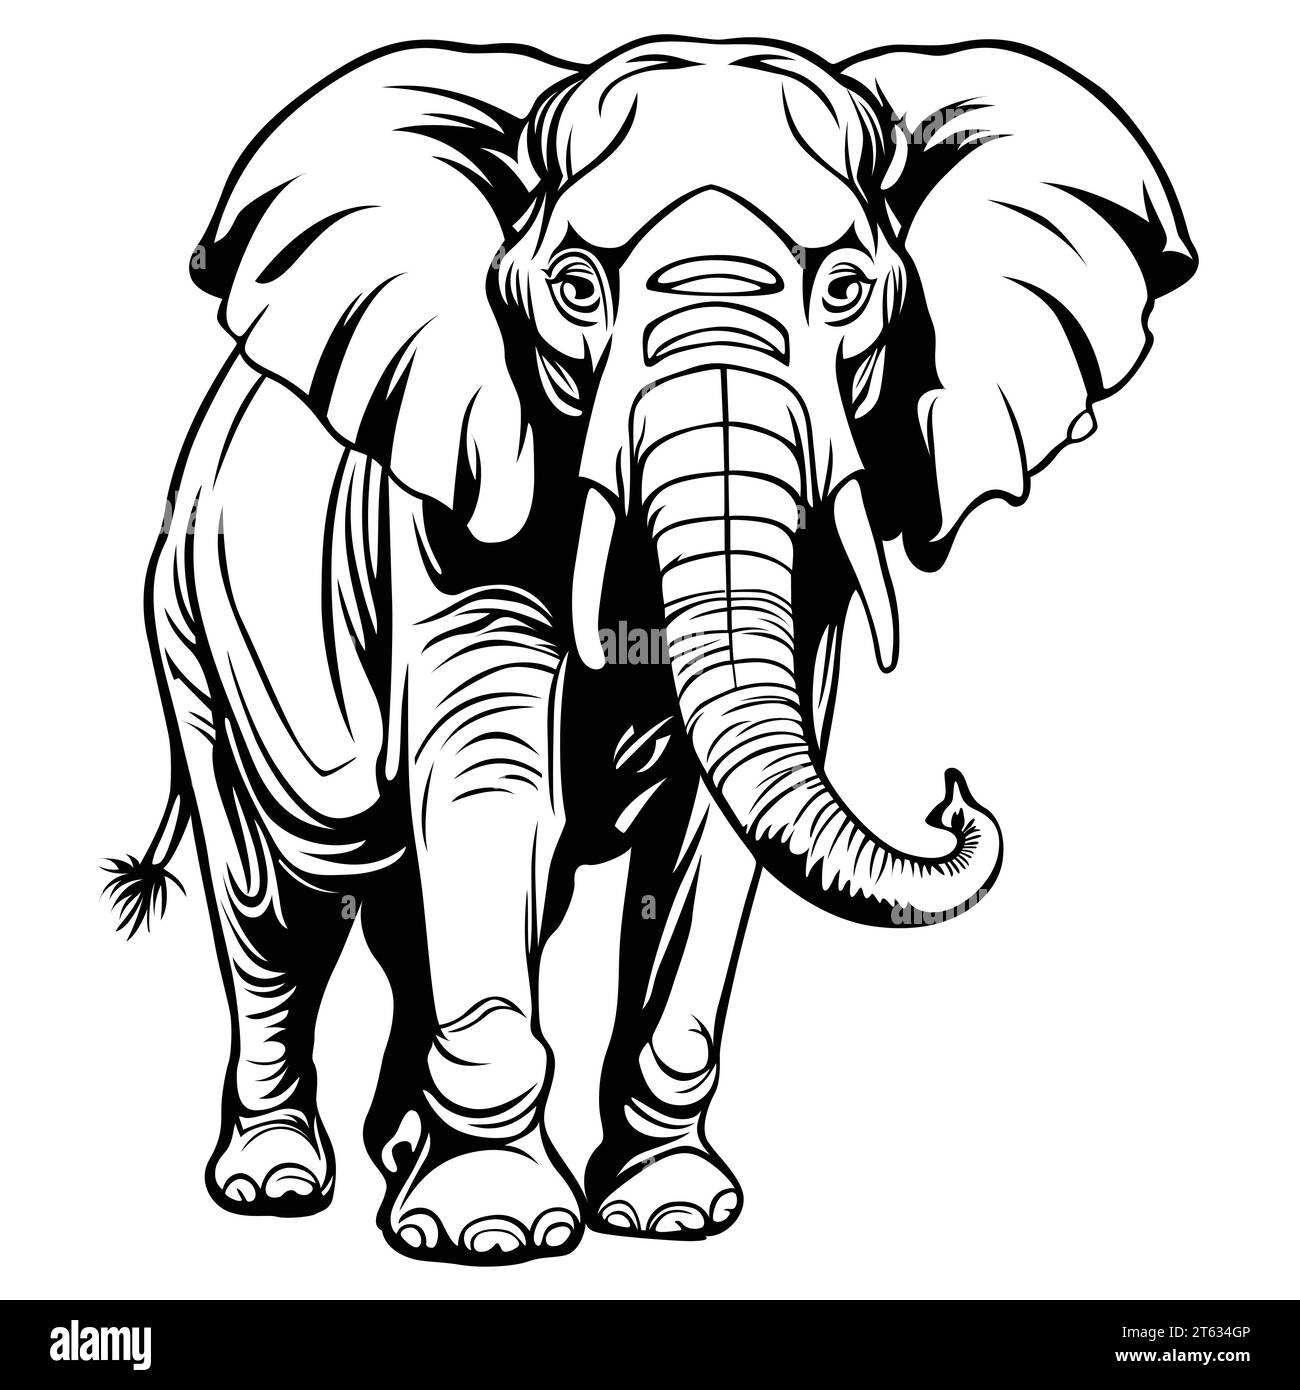 elephant outline drawing using a vector format Stock Vector